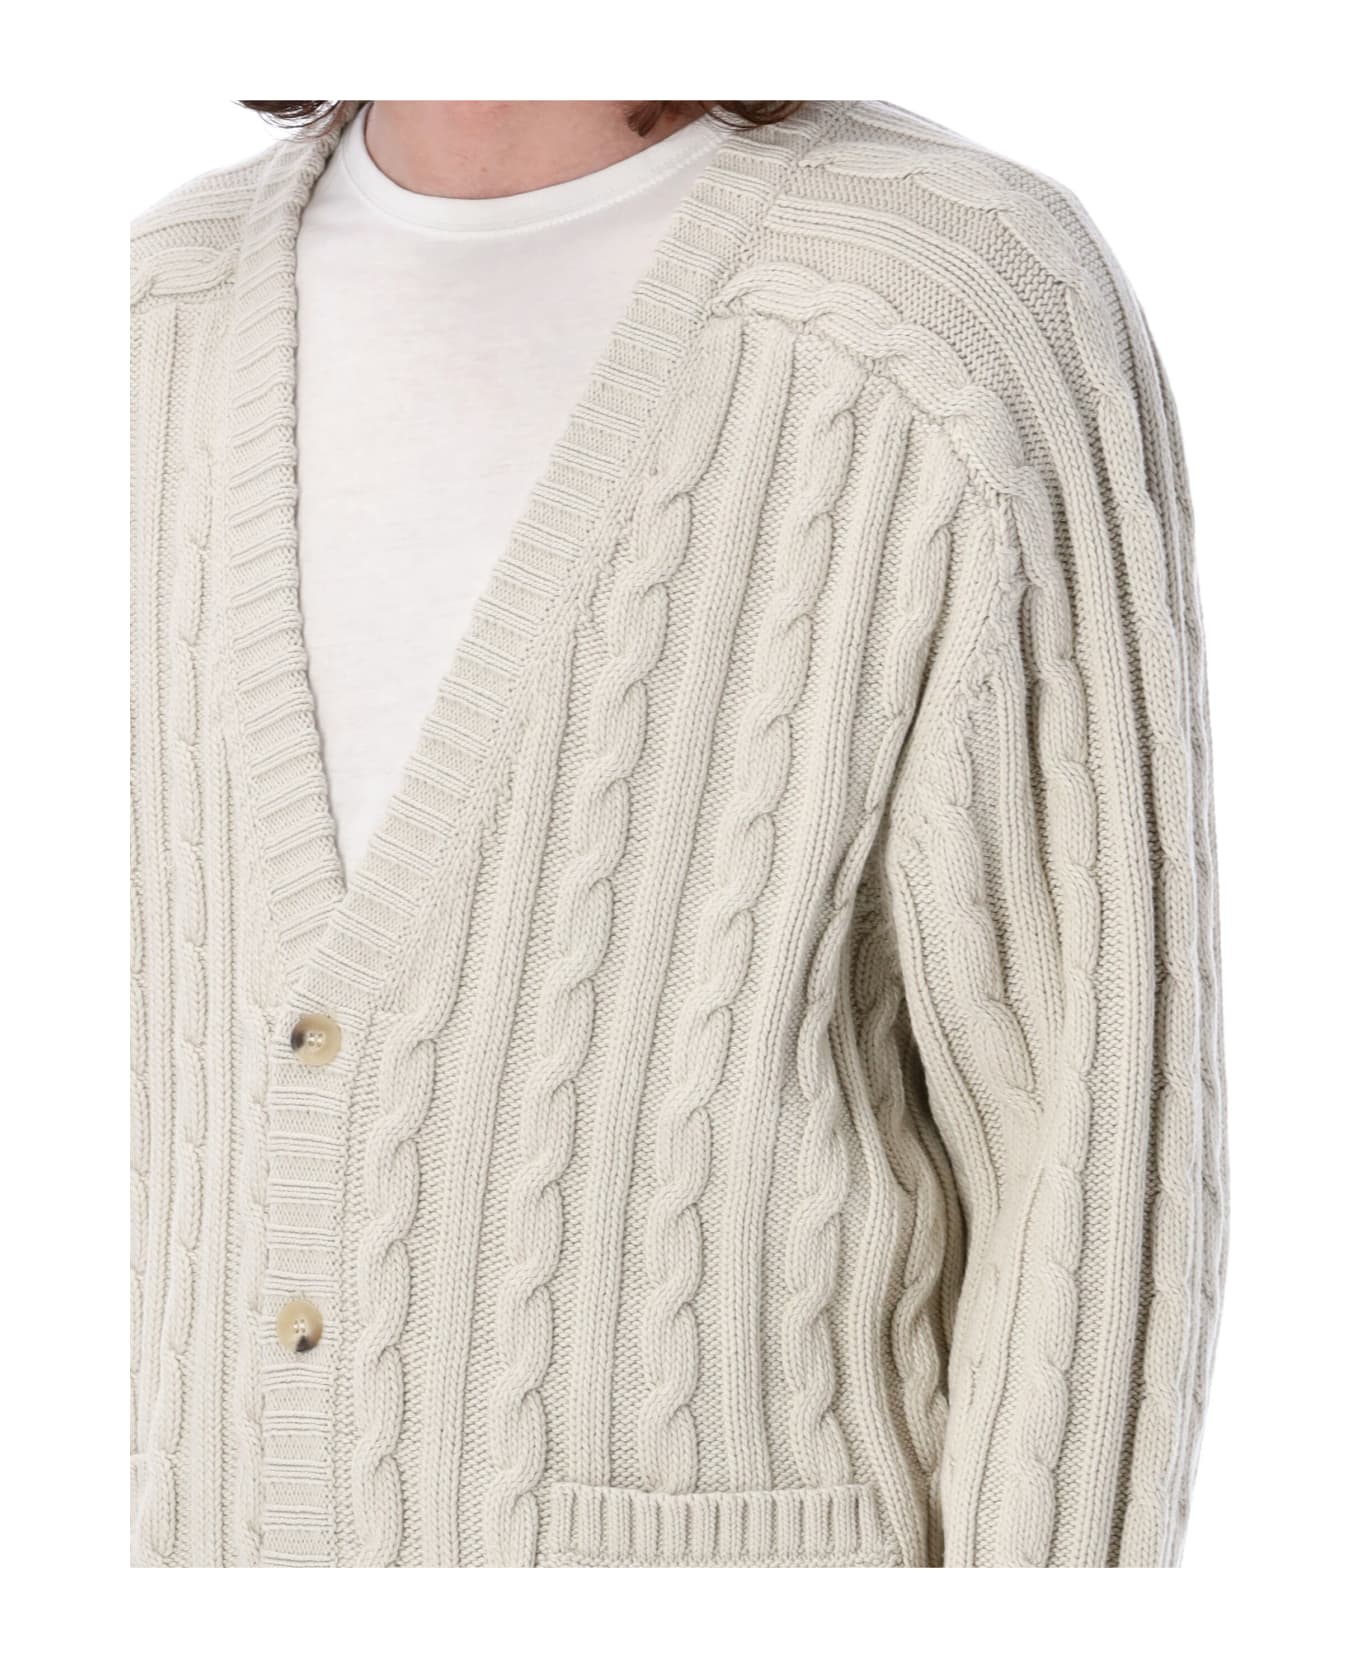 Helmut Lang Cable Knit Cardigan - DOVE